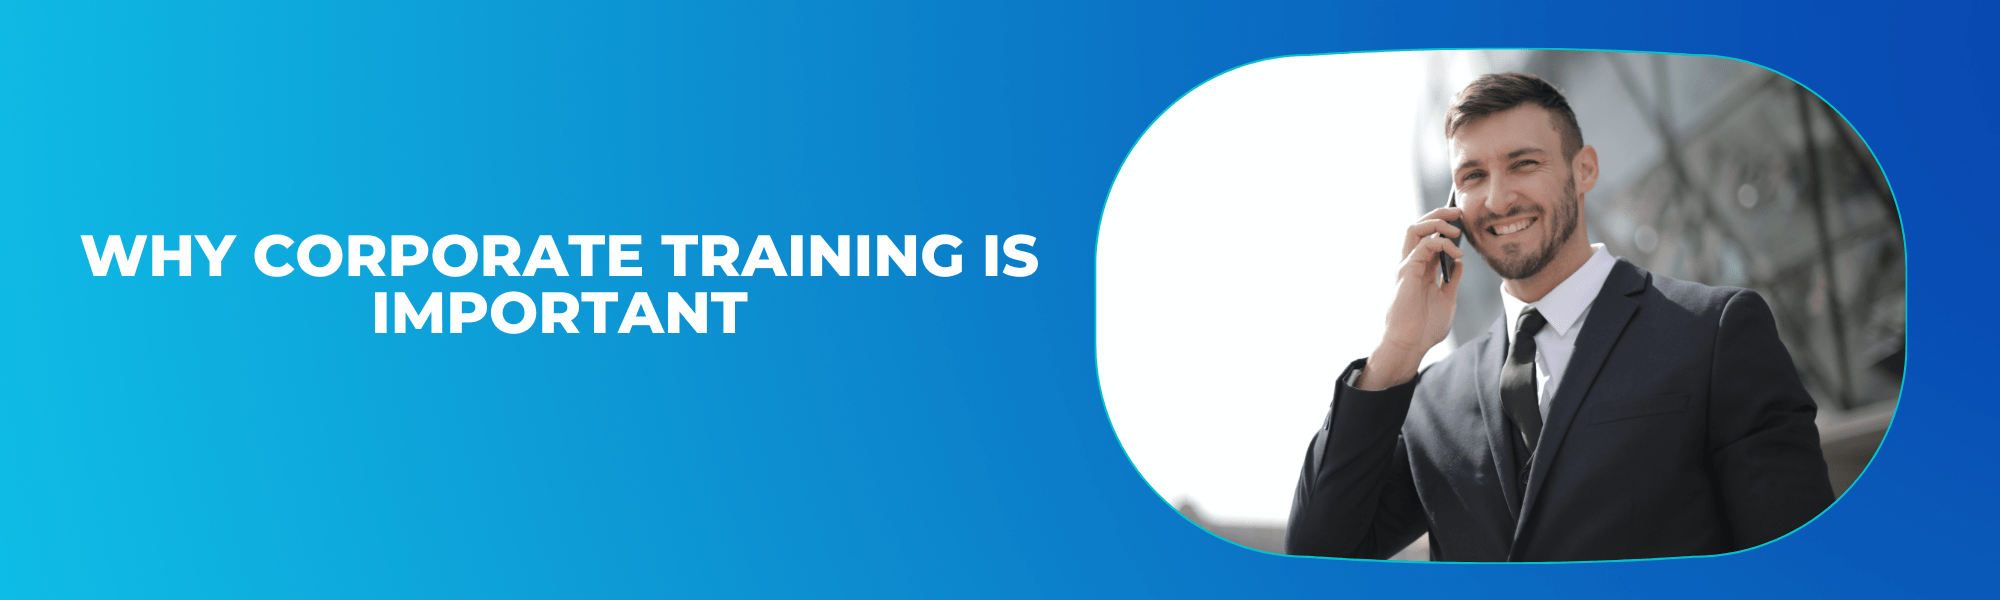 Why Corporate Training Is Important